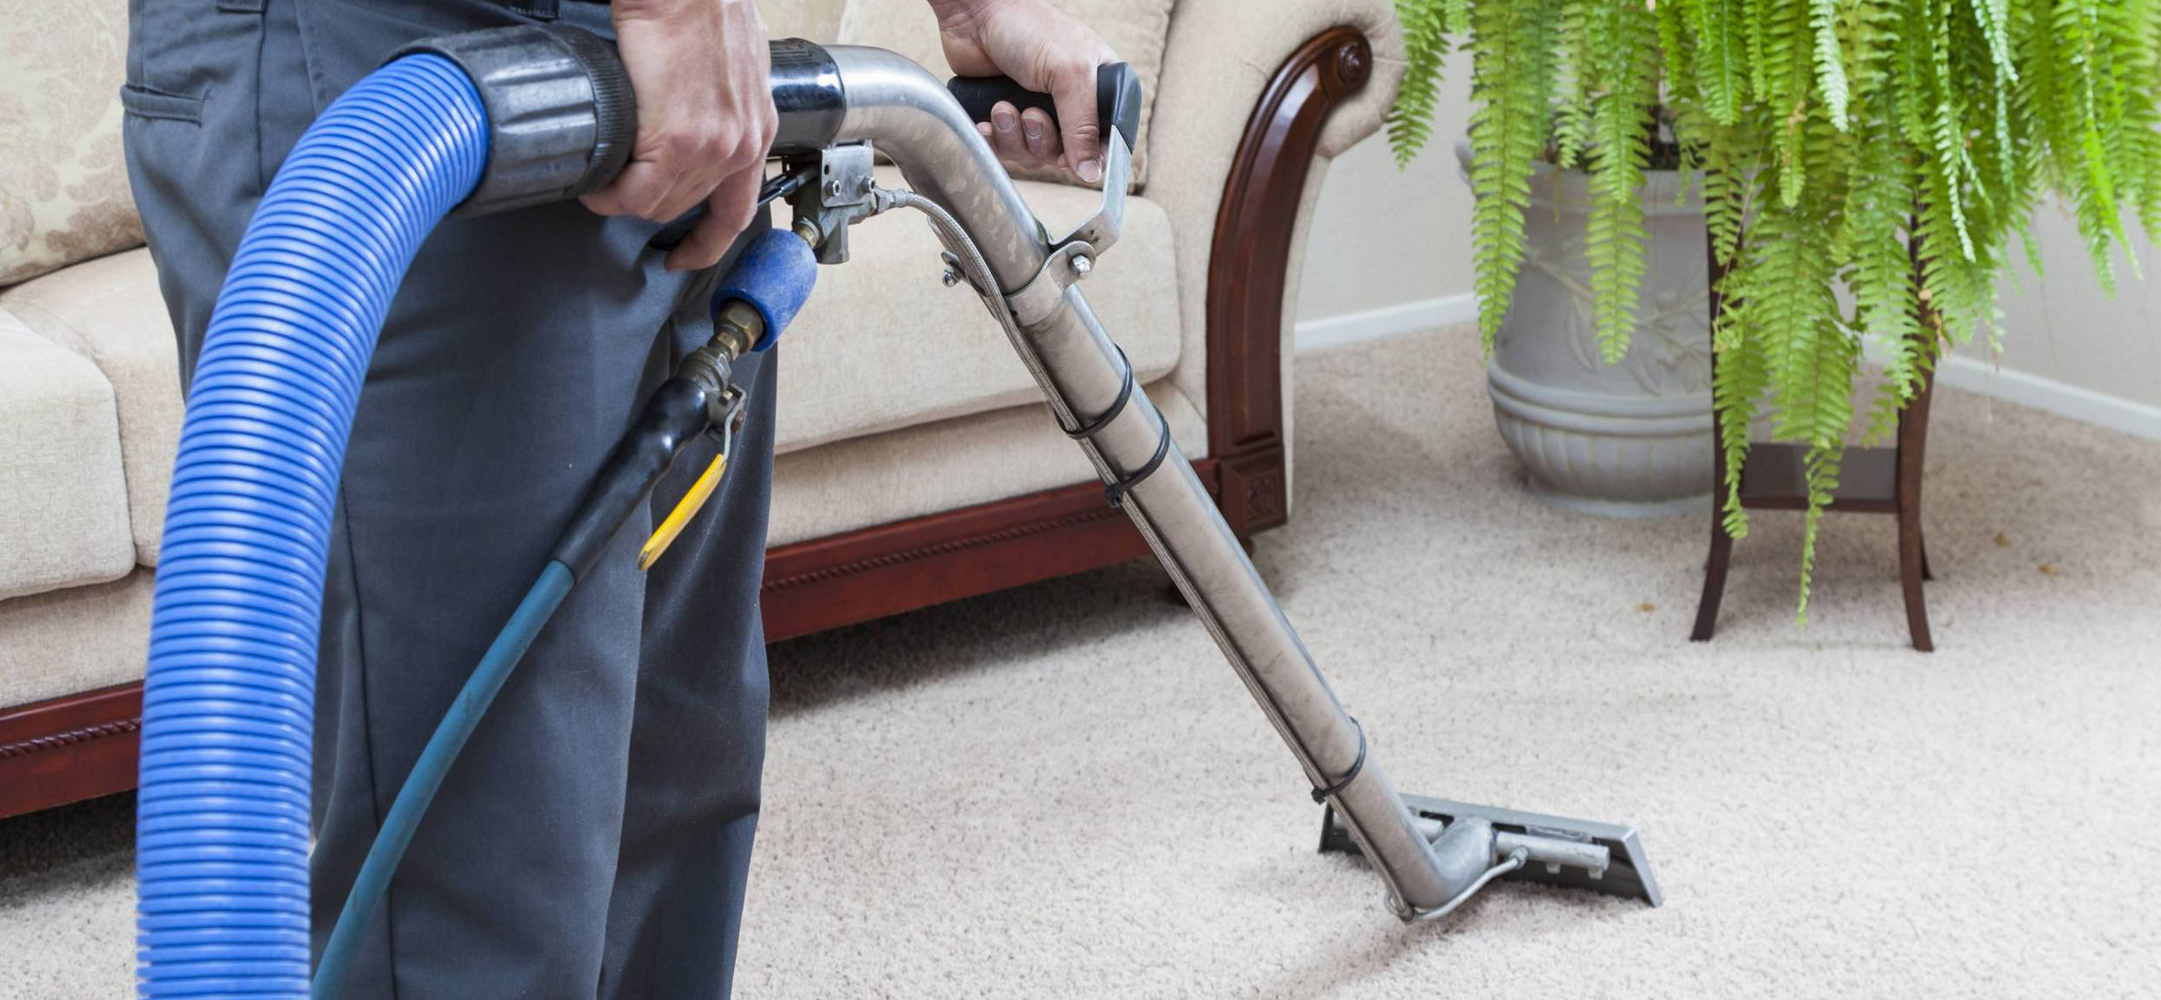 Istock Carpet Cleaning